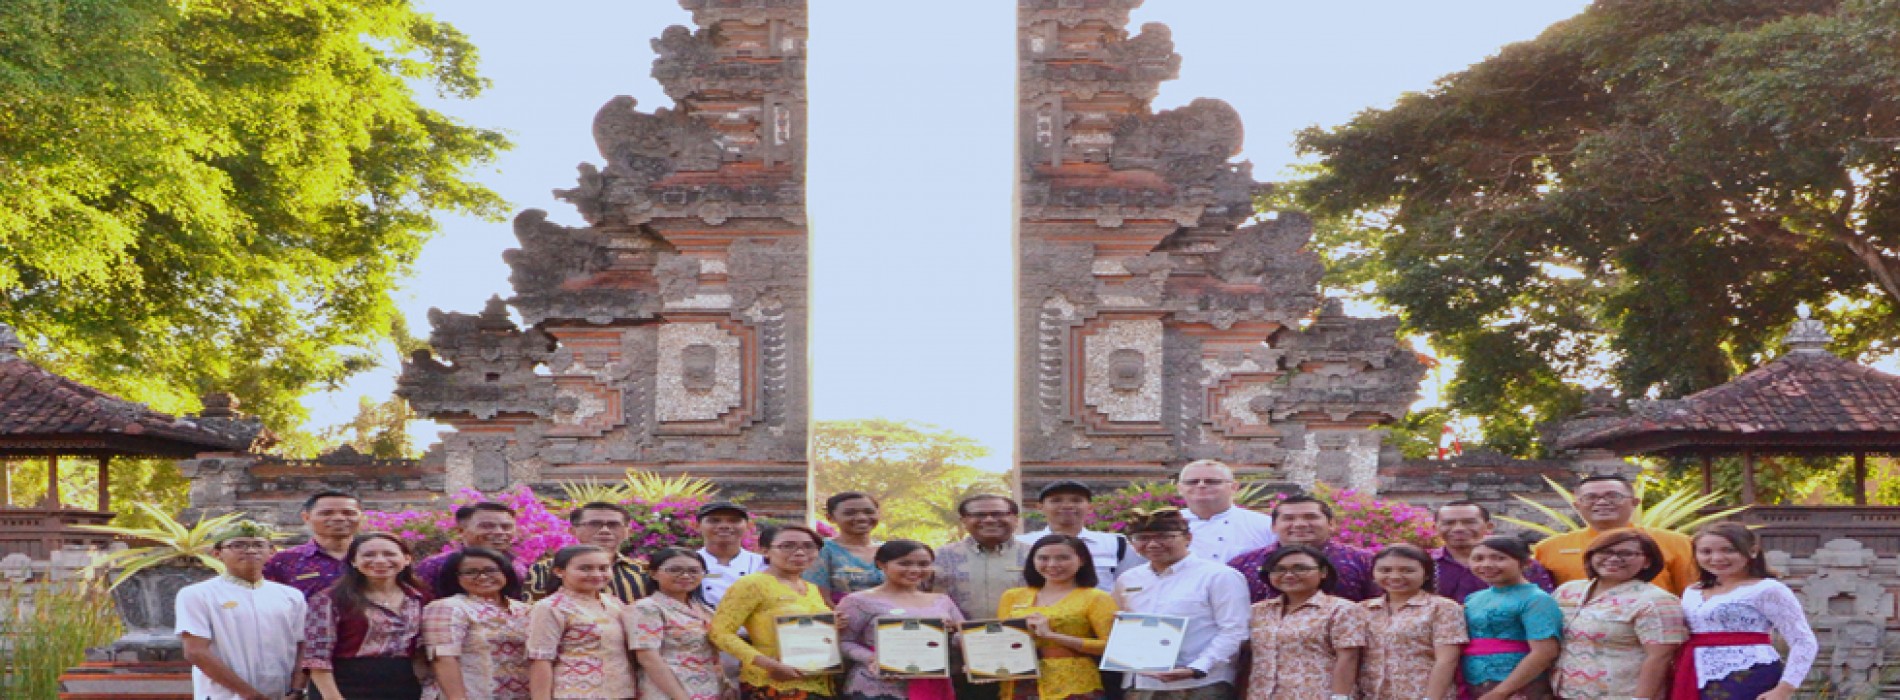 Awards Galore for Nusa Dua Beach Hotel & Spa at The 7th Asian Lifestyle Tourism Awards 2017